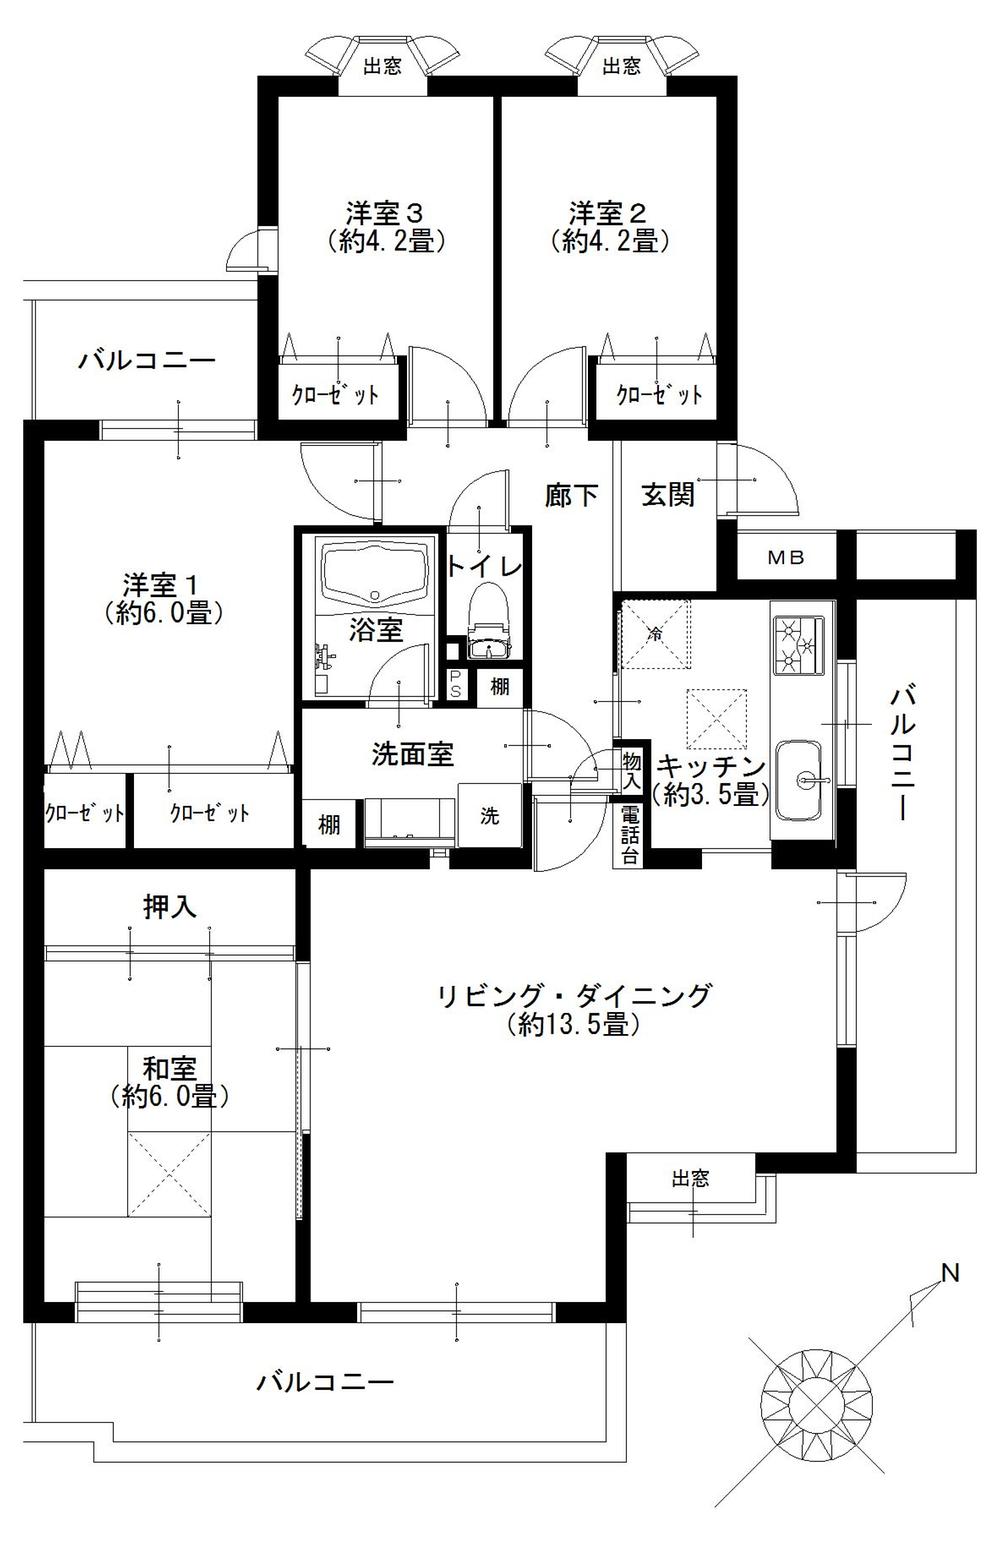 Floor plan. 4LDK, Price 22,900,000 yen, Occupied area 83.34 sq m , Balcony area 18.37 sq m there is a rich opening 4LDK